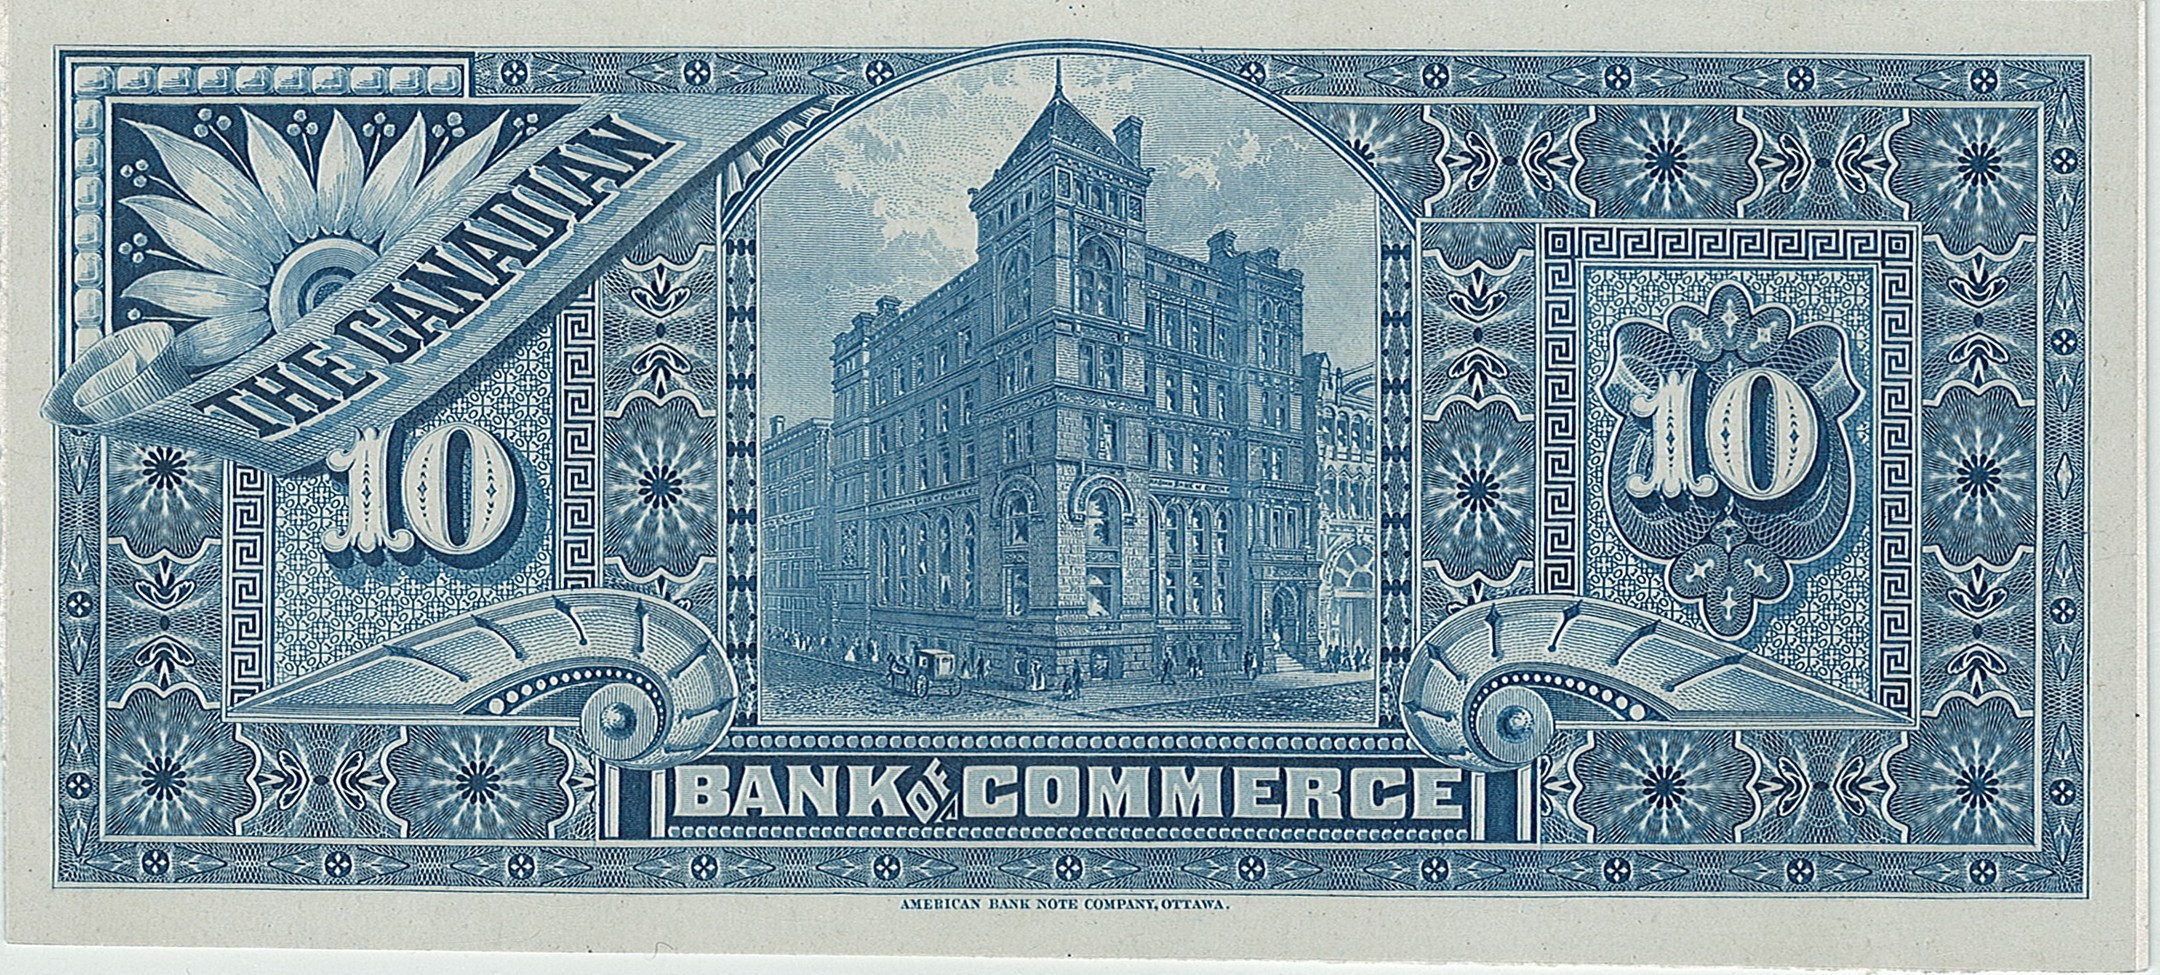 Canadian Bank of Commerce, 10$, Канада, 1888-1912 г.г.